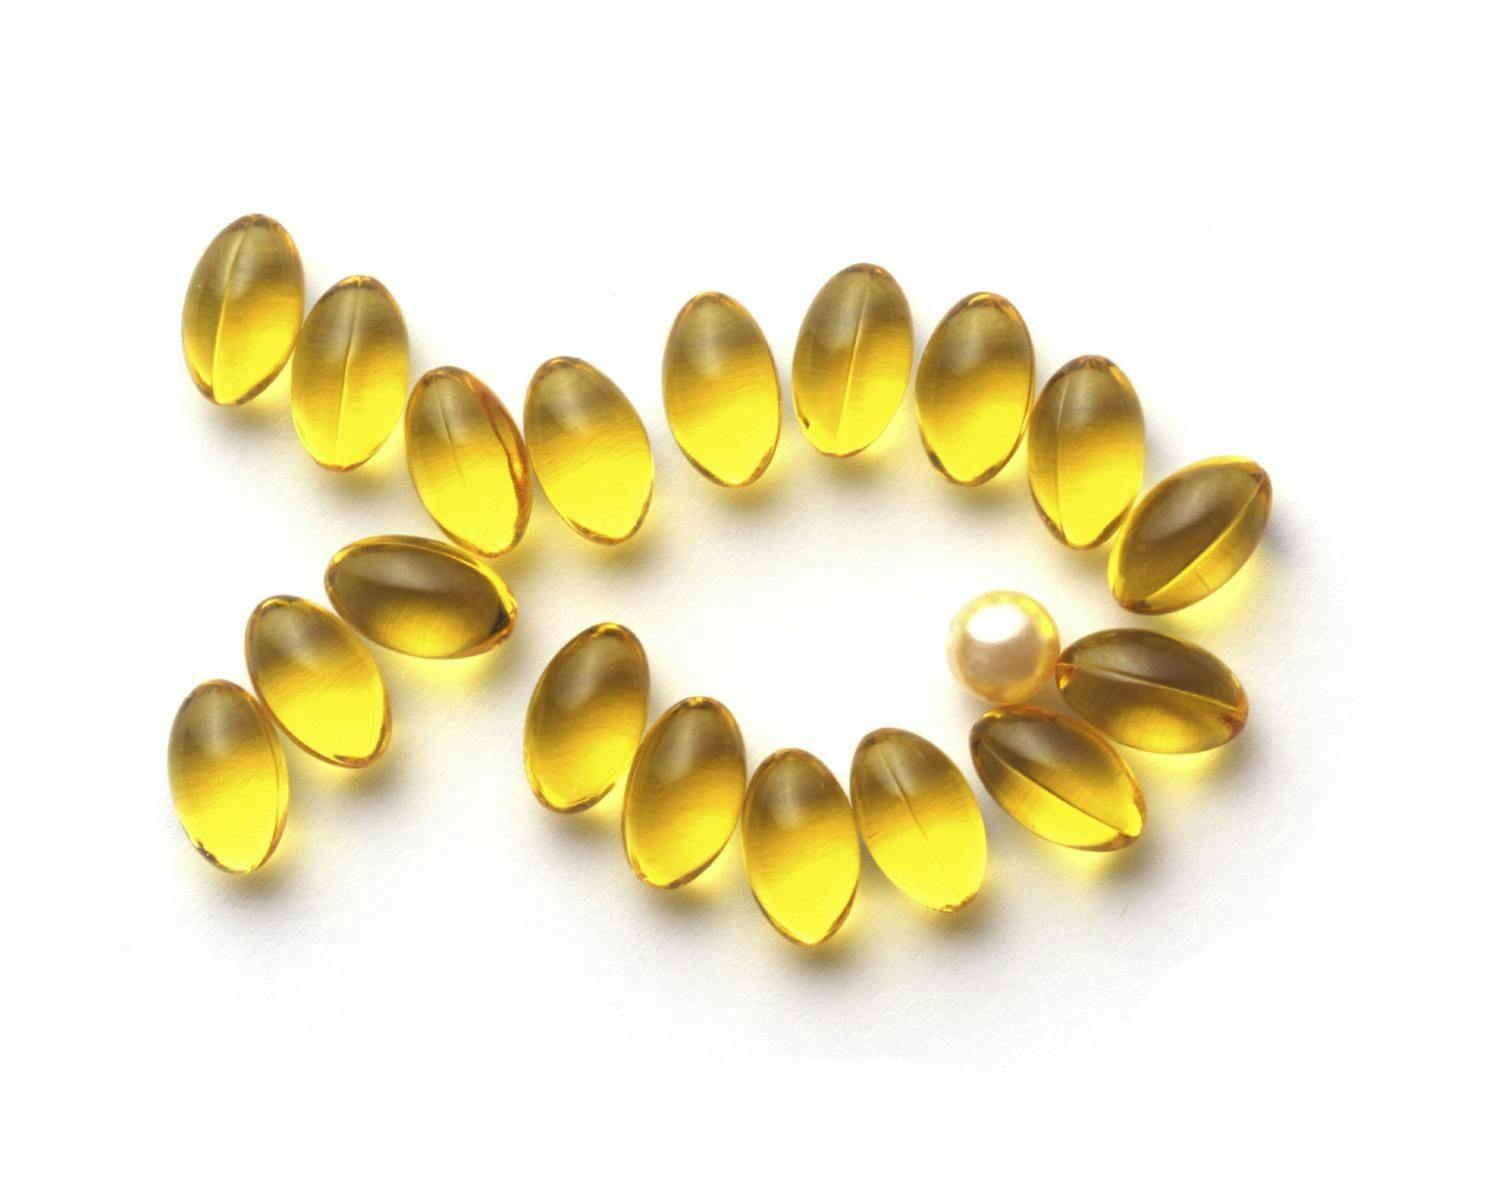 Omega-3 Drug Epanova Reports Positive Results from EVOLVE Phase III Study